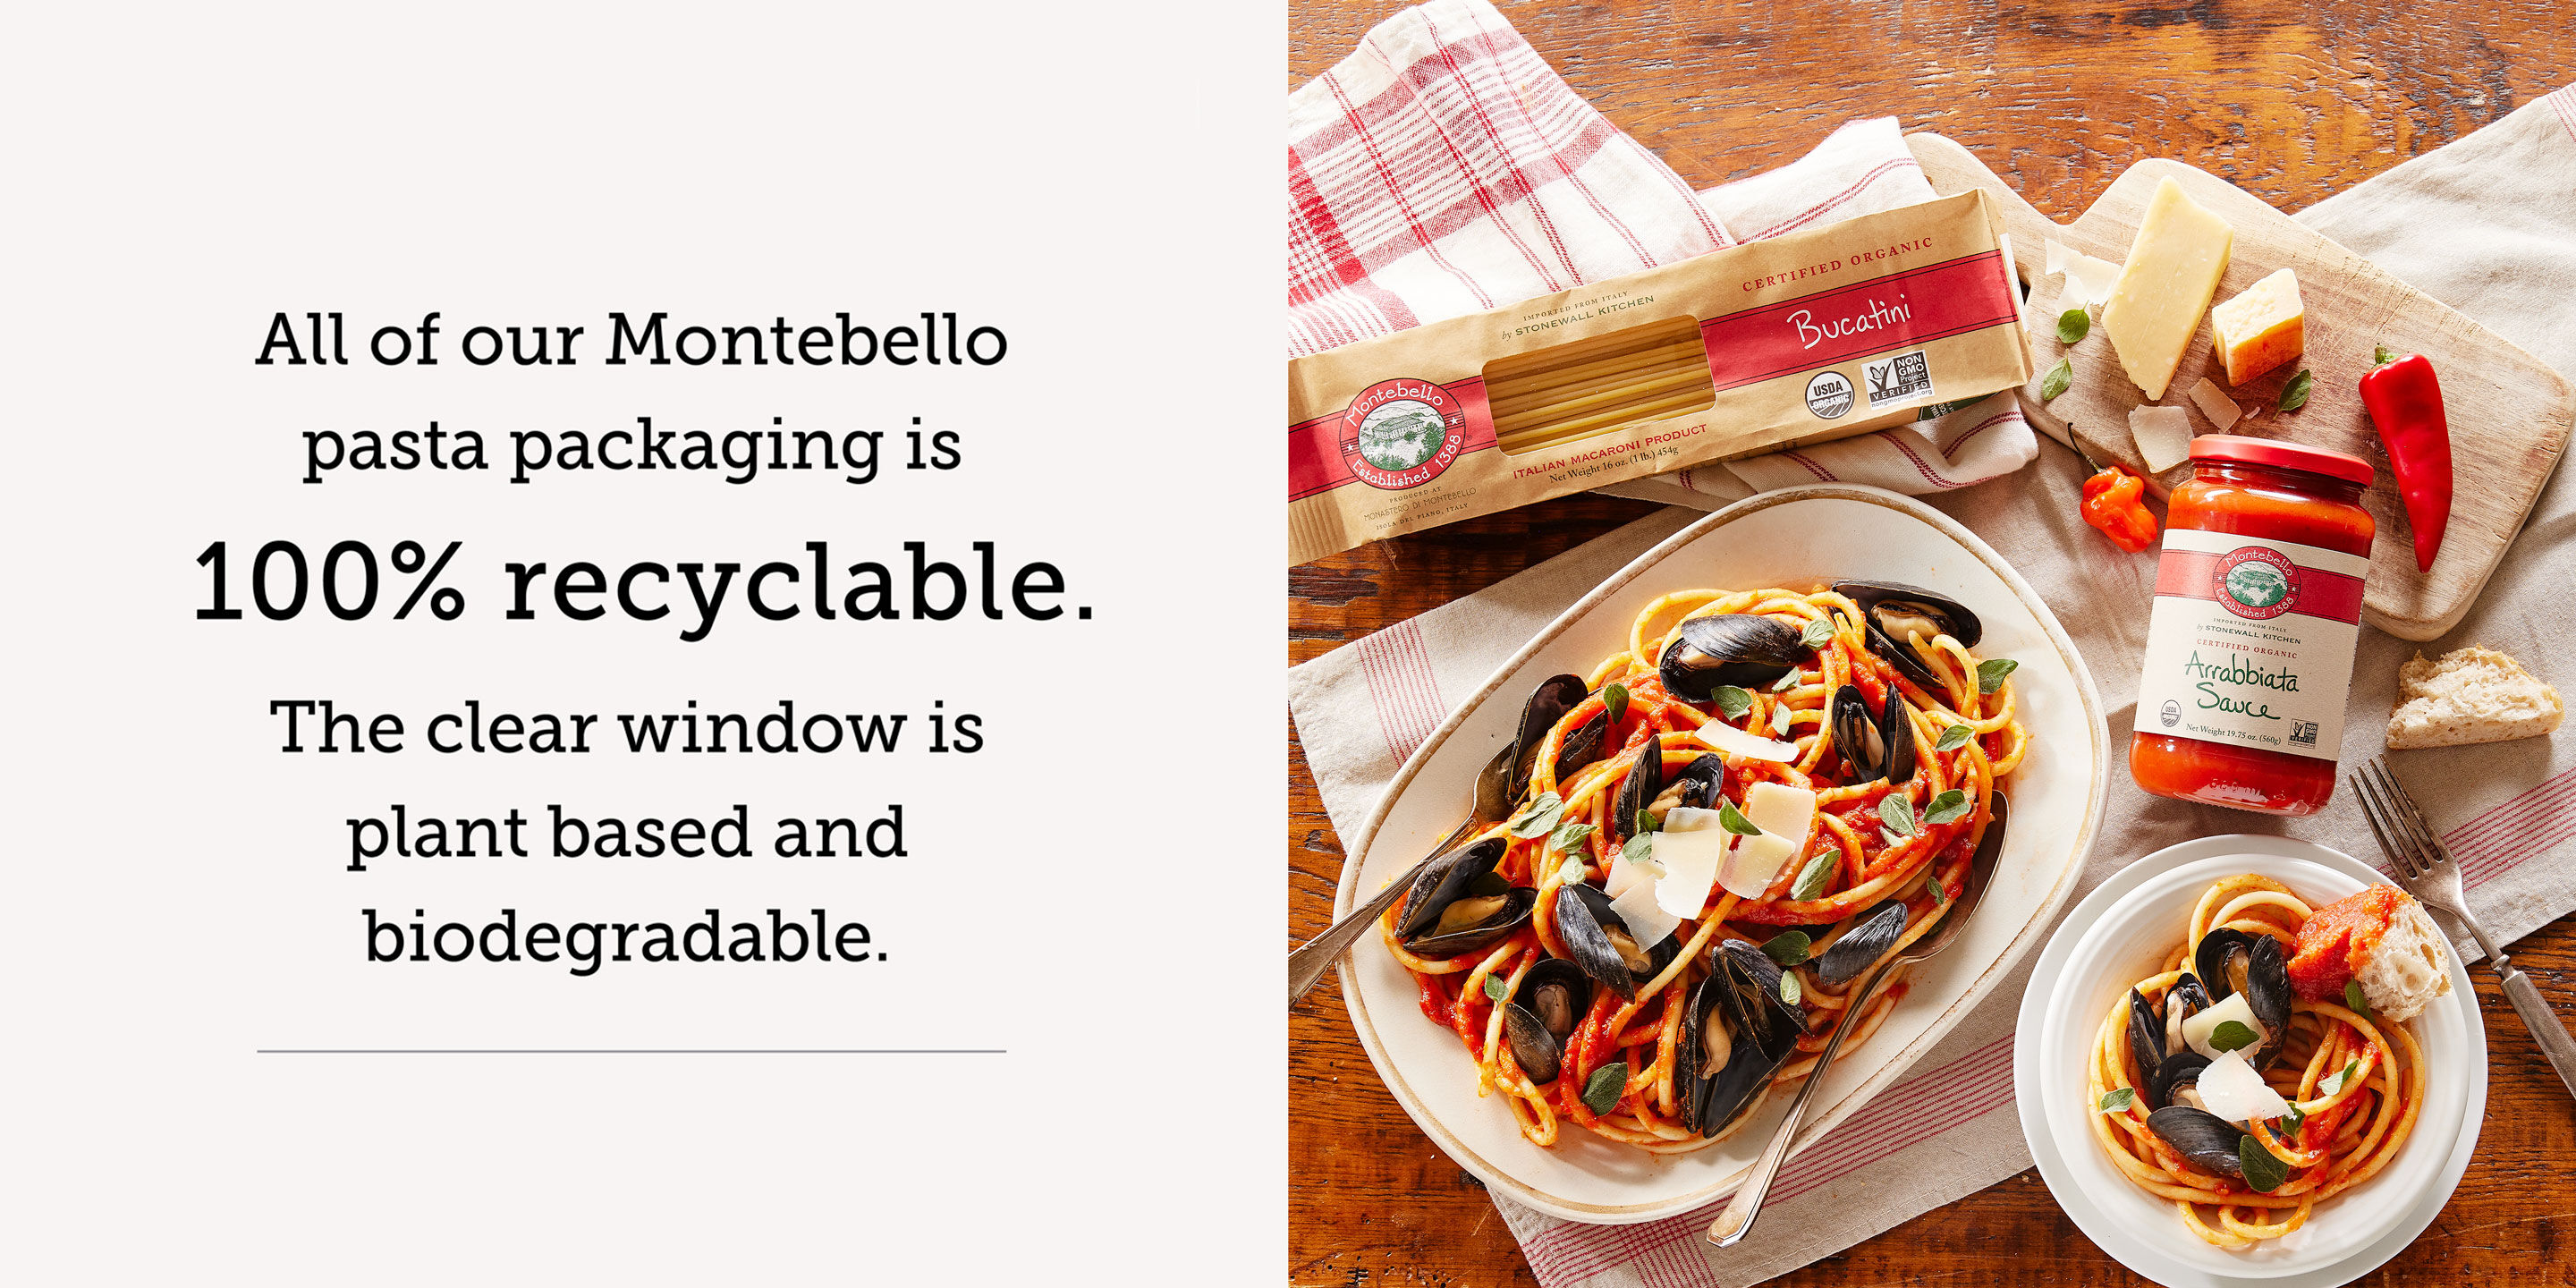 All of our Montebello pasta packaging is 100% recyclable. The clear window is plant based and biodegradable